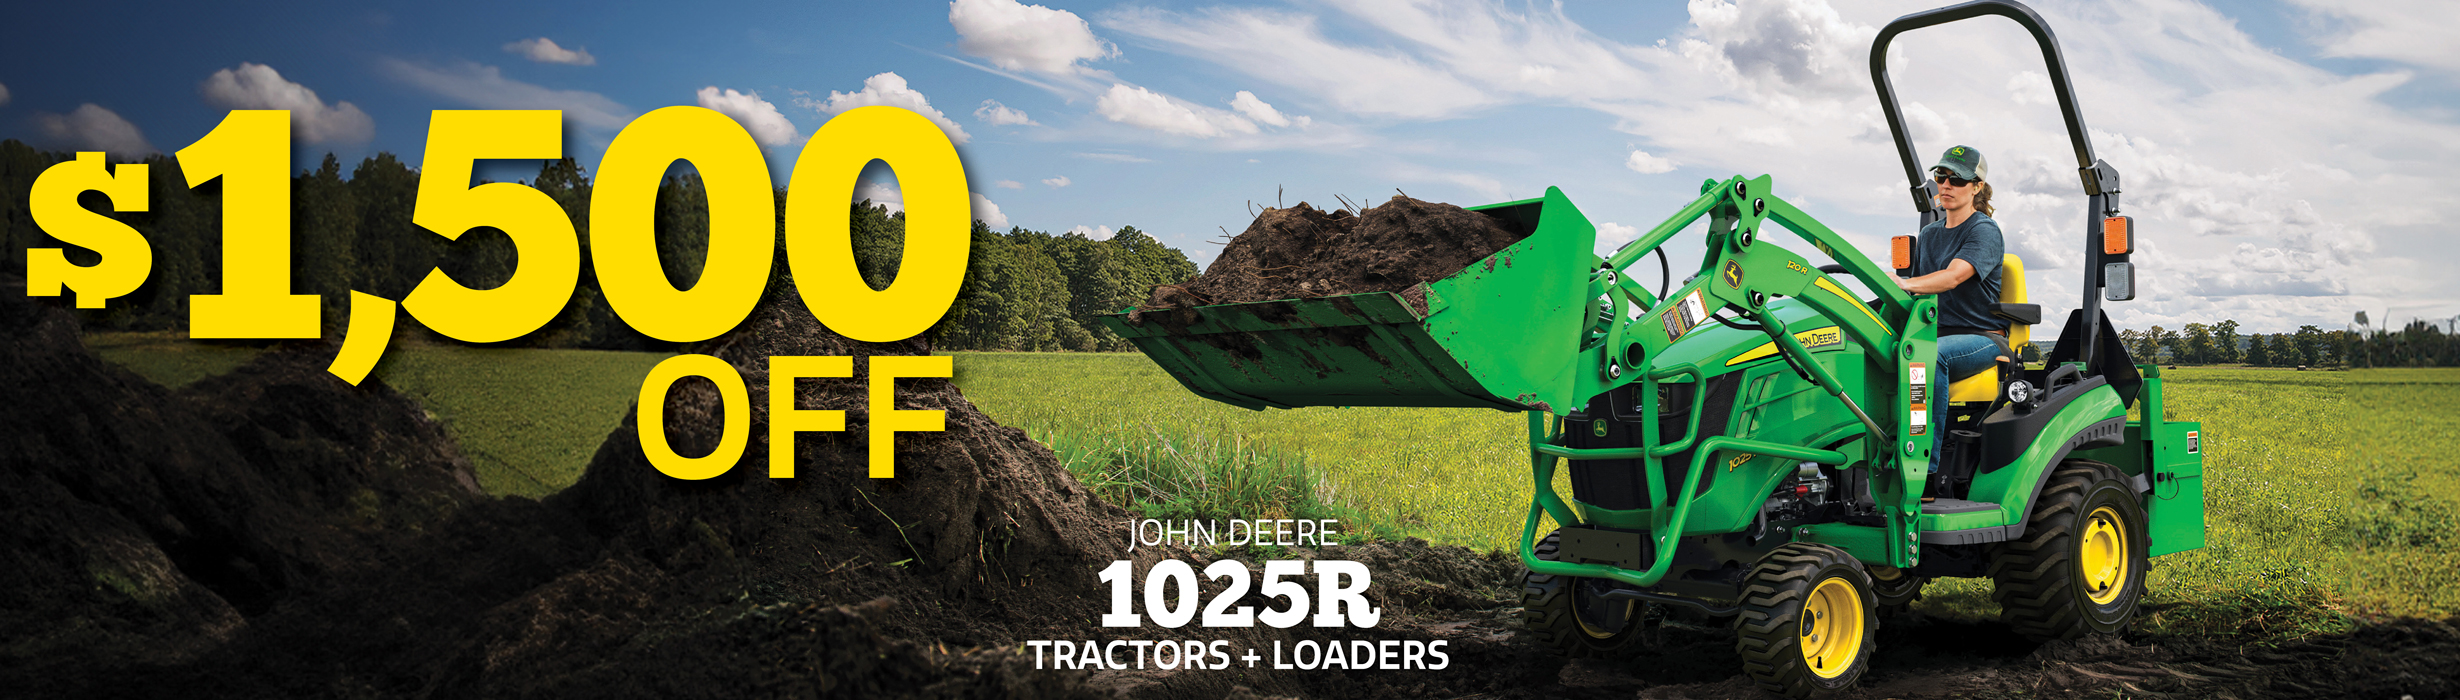 Right now, get $1,500 OFF on 1025R Tractor + Loader